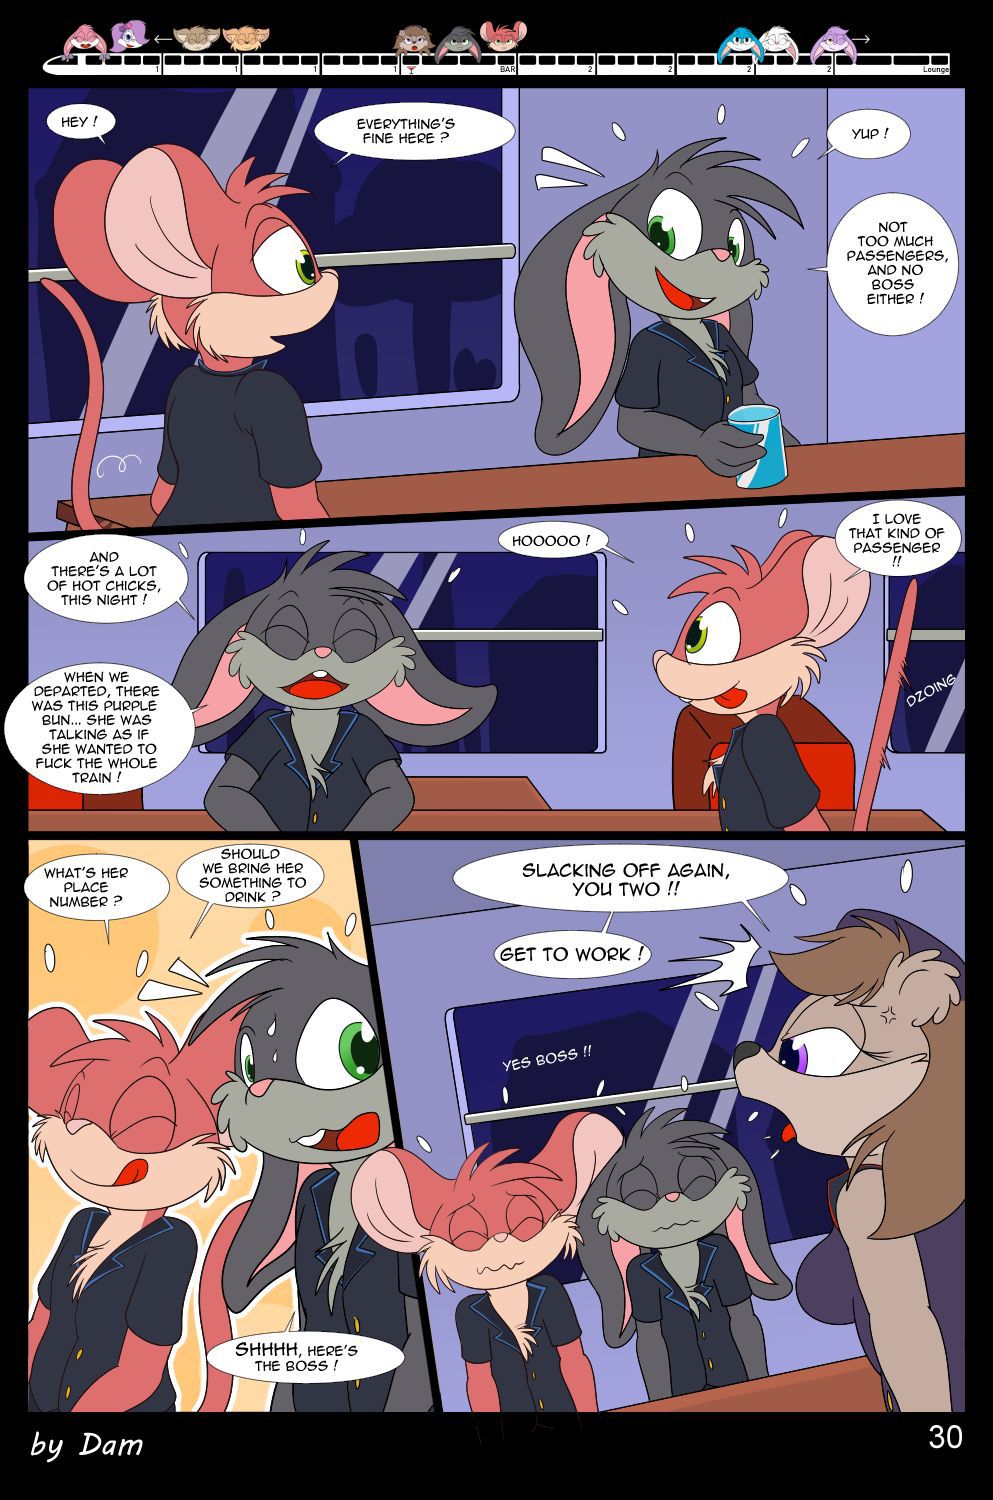 [Dam] Toons on a train [Ongoing] 30